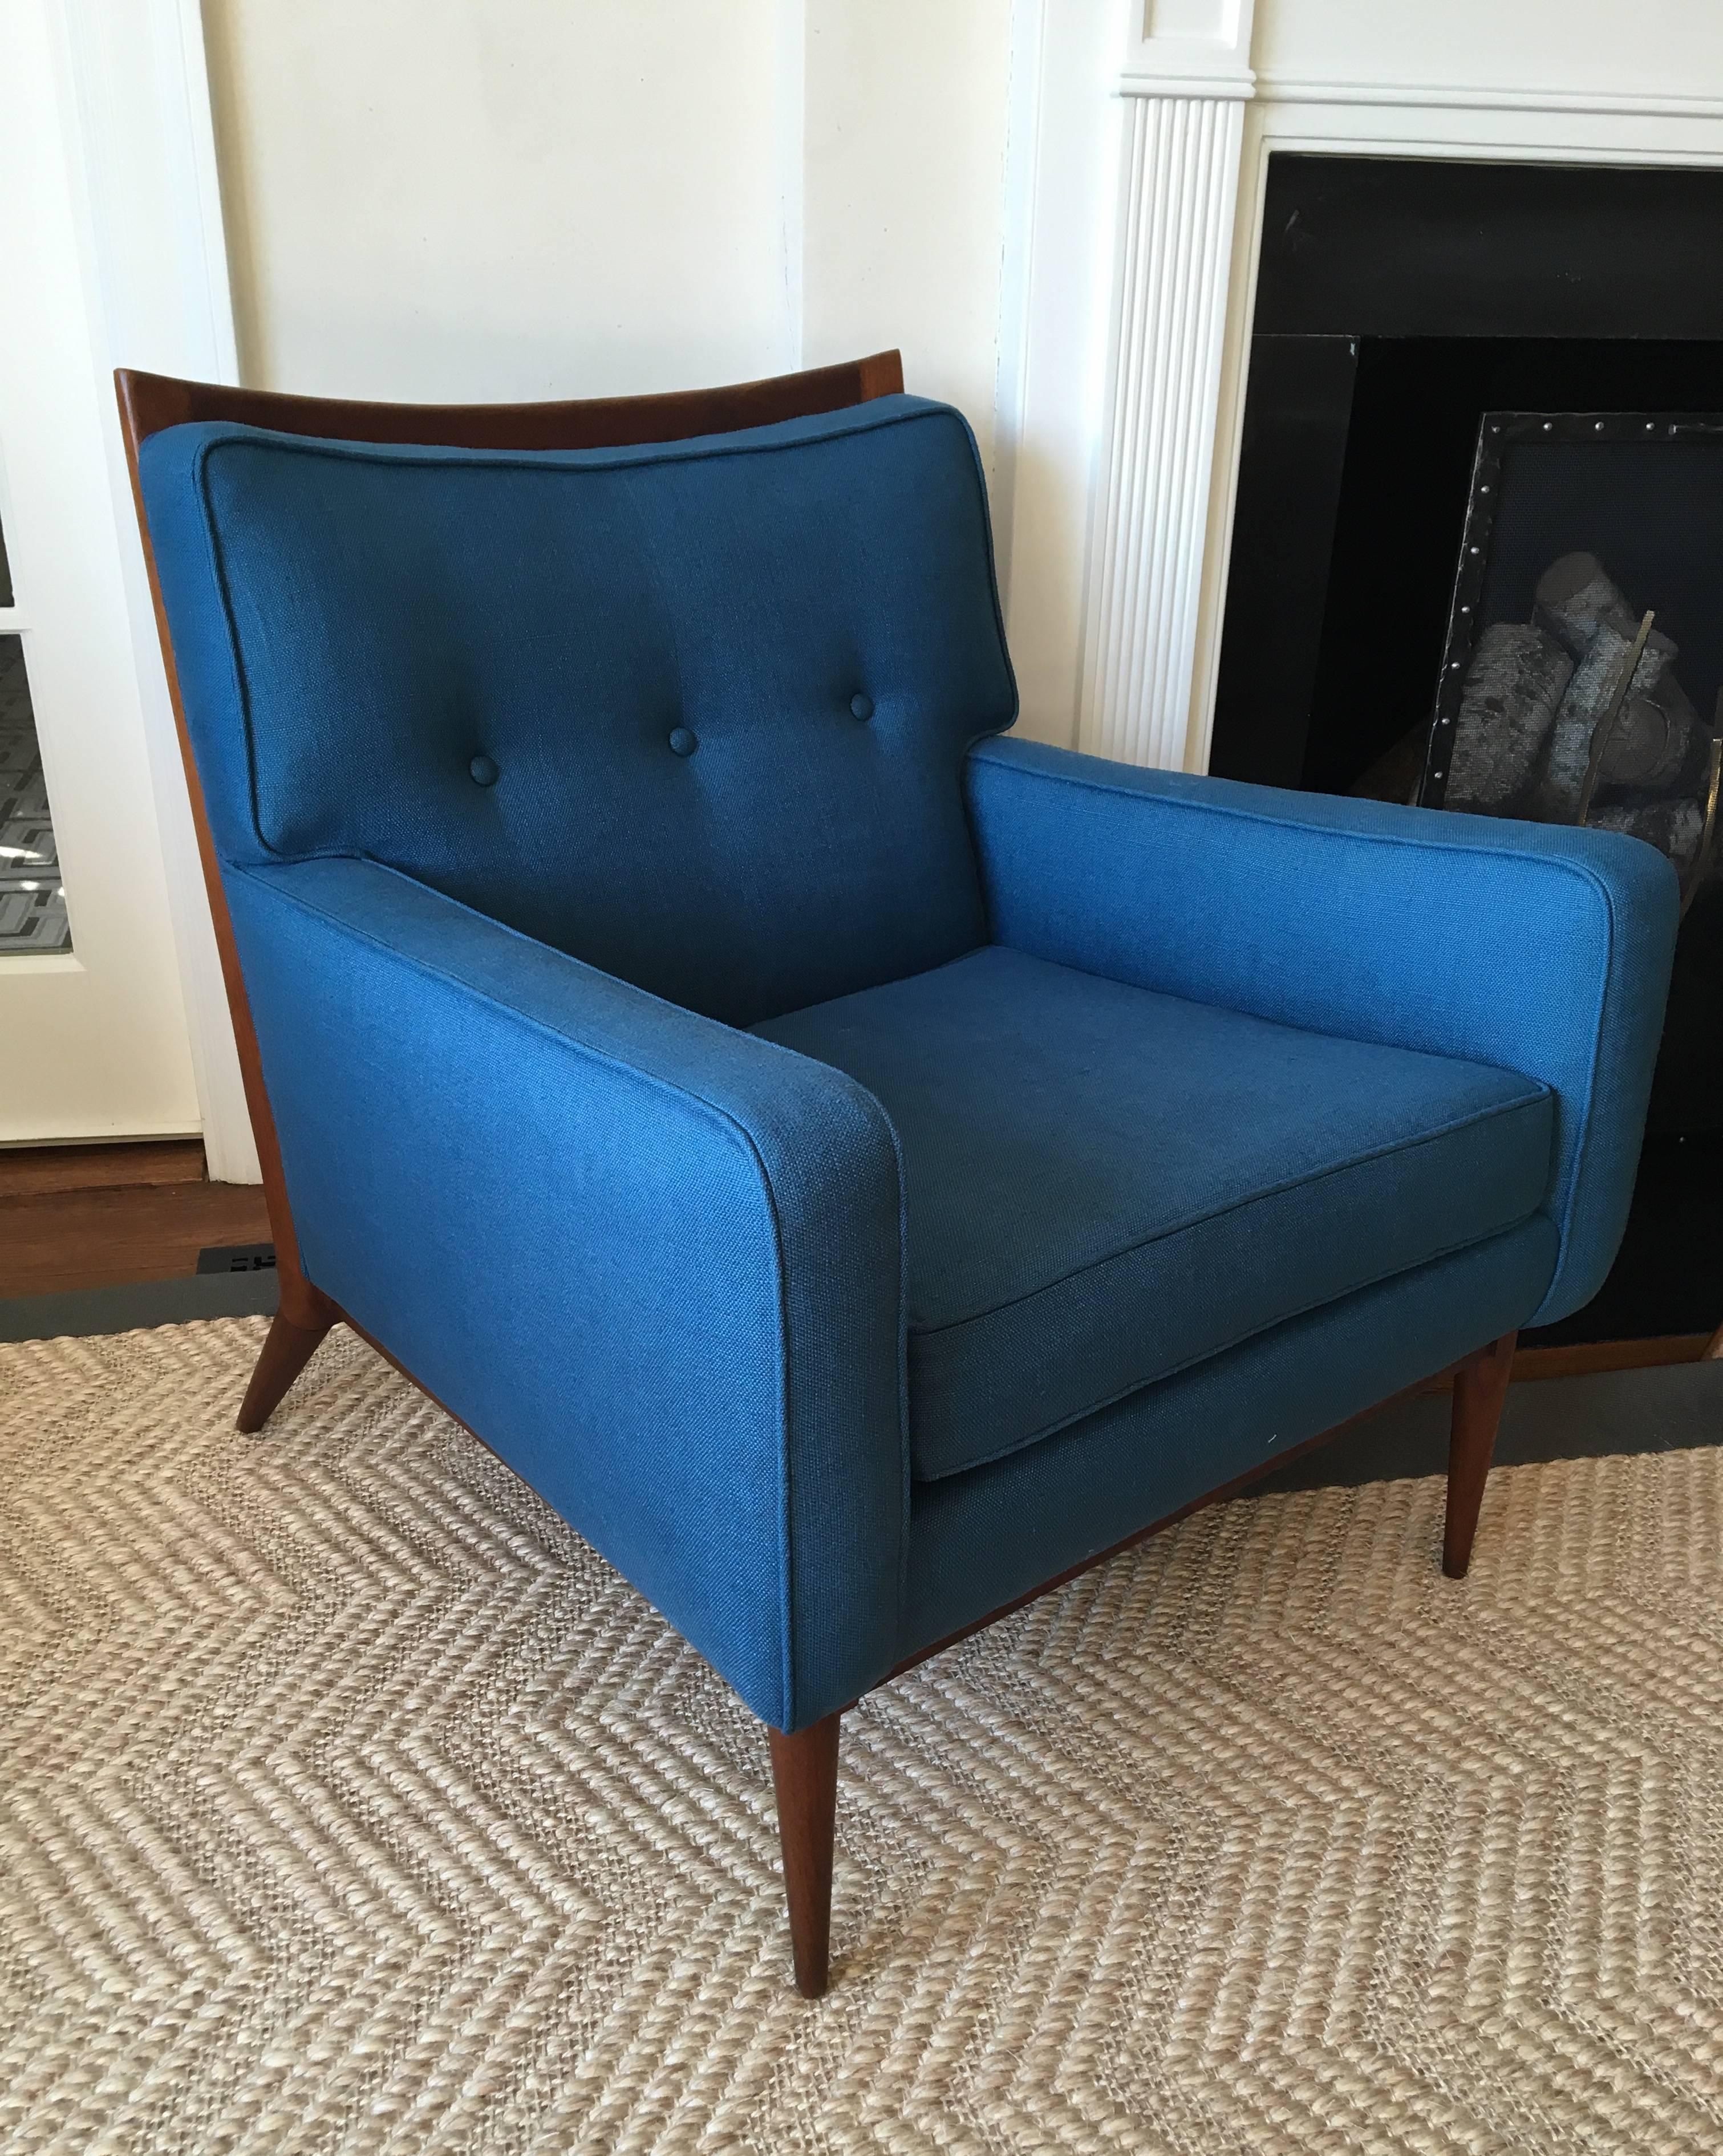 Iconic, single walnut chair, designed by Paul McCobb and produced by Calvin - 1950s. 
Walnut frame is beautifully refinished in natural and complemented by a peacock blue linen upholstery.
Please inquire if you like to see this chair in the gallery.